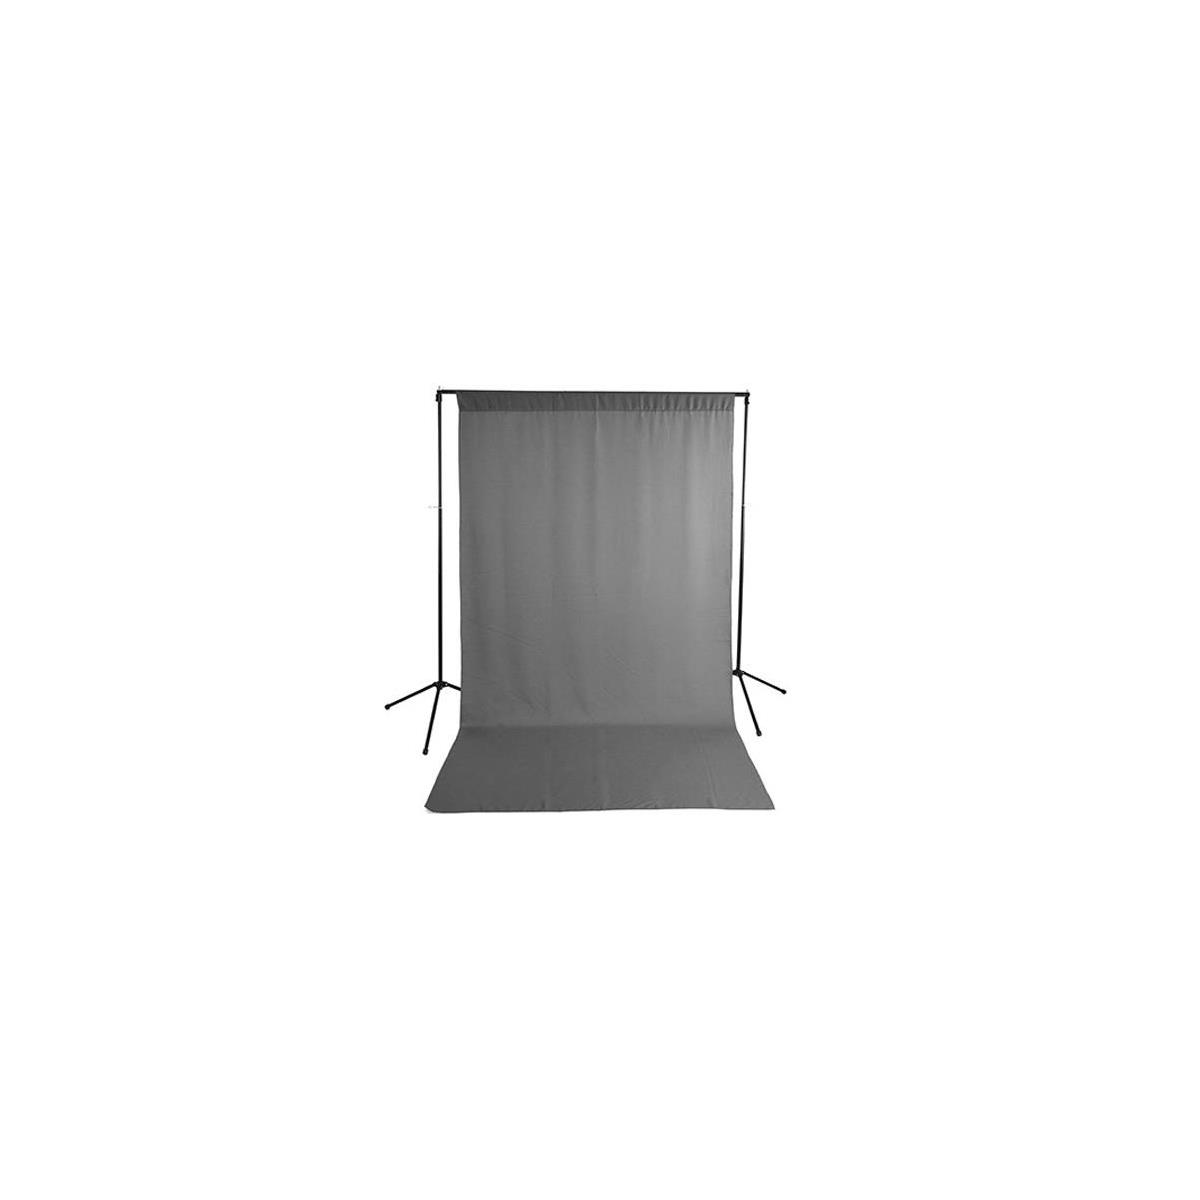 Image of Savage Economy Background Support Stand with 5x9' Gray Backdrop